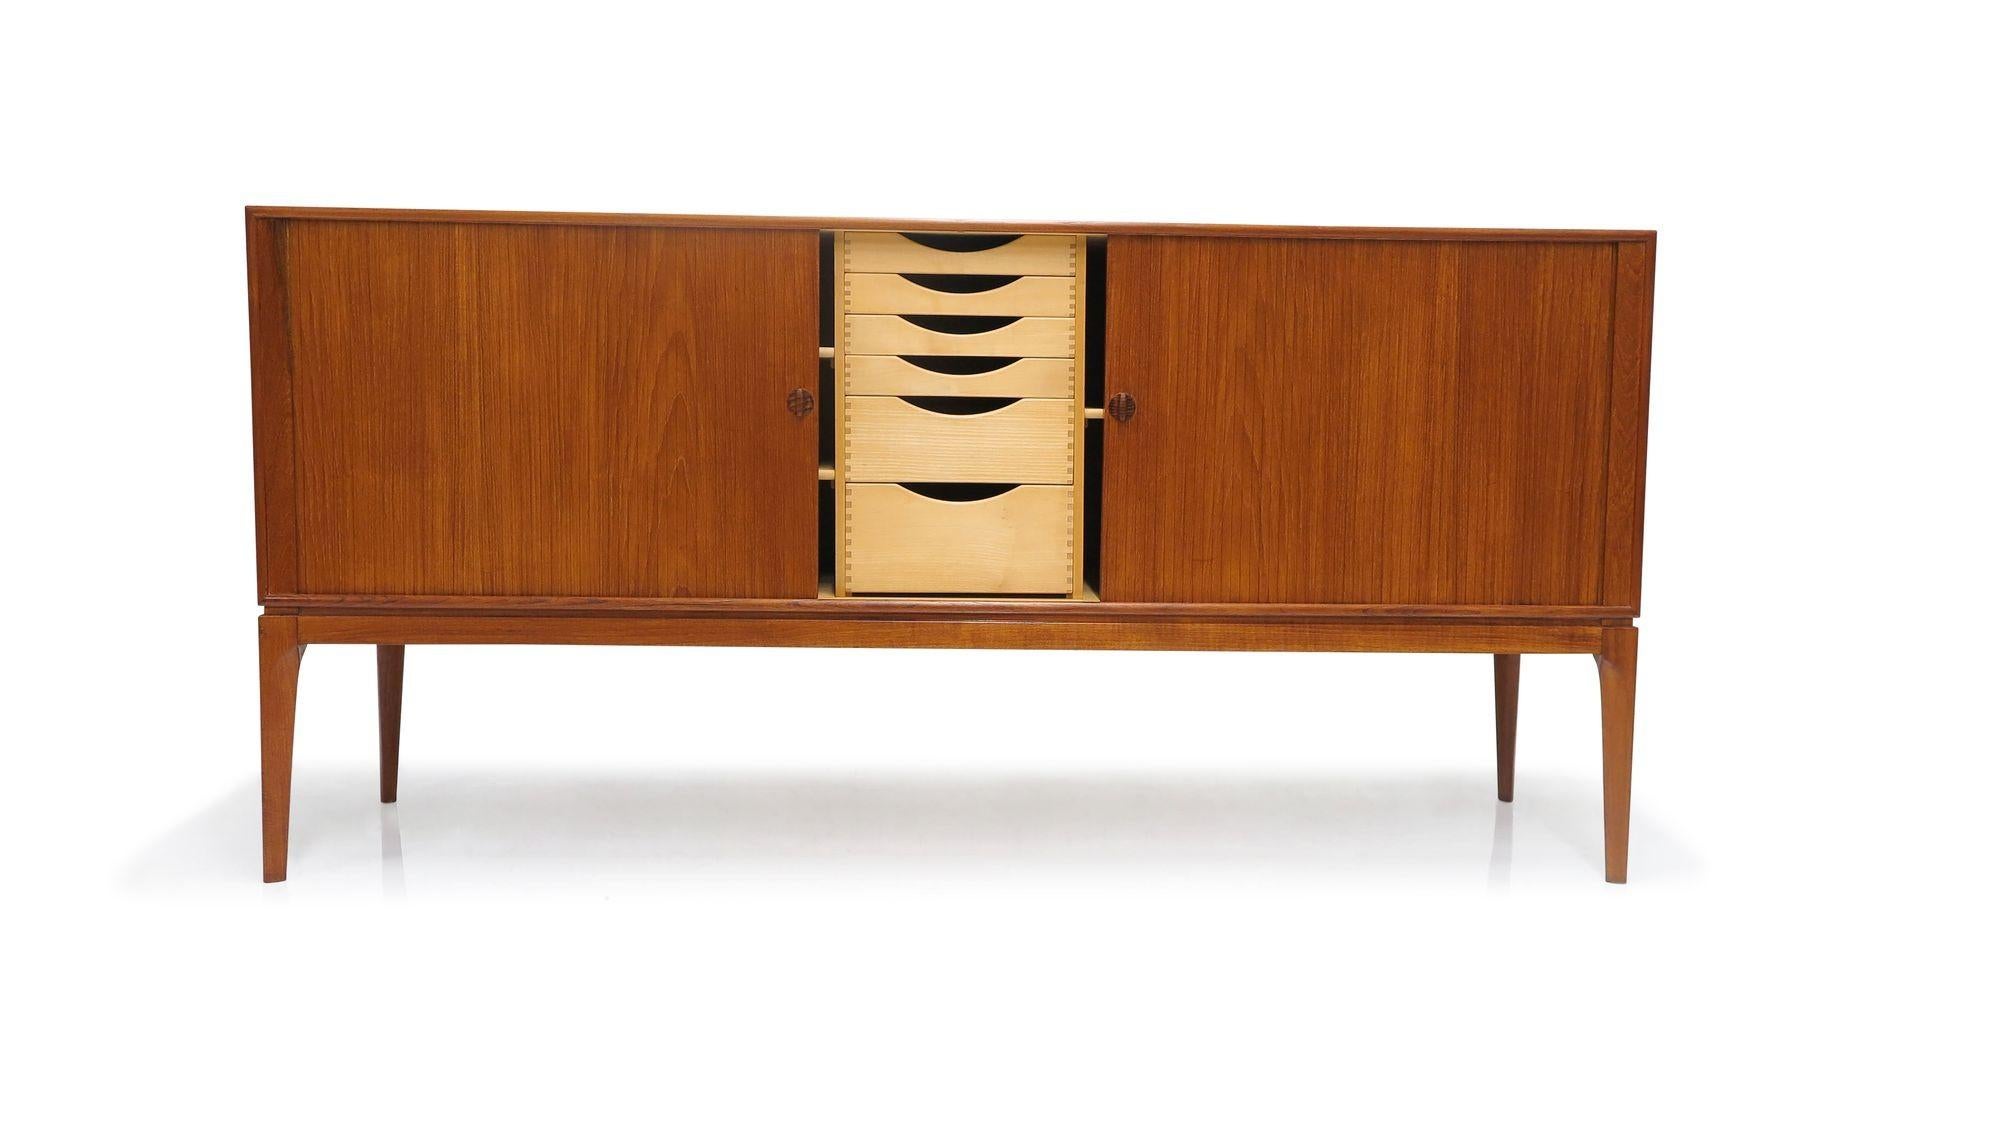 Scandinavian teak credenza, crafted in 1955 in Denmark. This finely crafted cabinet, made of teak with mitered corners, features tambour doors with sculpted pulls. The doors open to reveal a birch interior with adjustable shelves and silverware